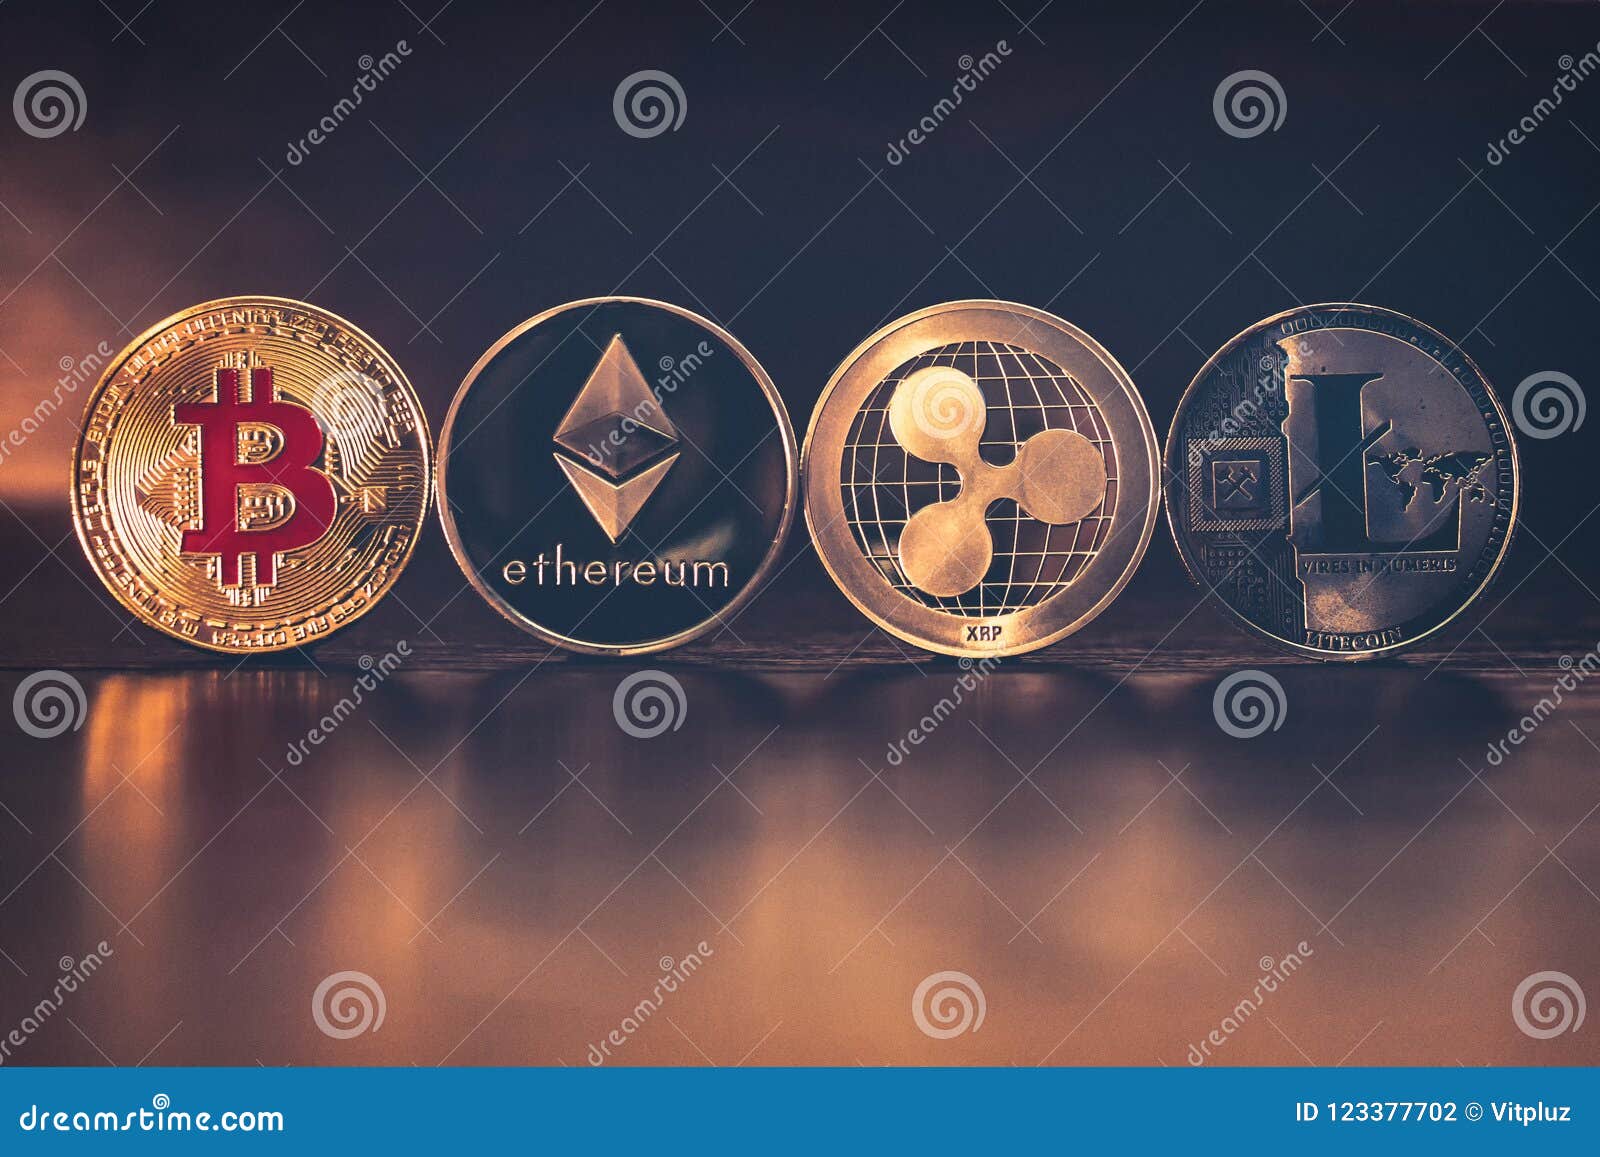 12, Bitcoin Ethereum Litecoin Ripple Royalty-Free Images, Stock Photos & Pictures | Shutterstock